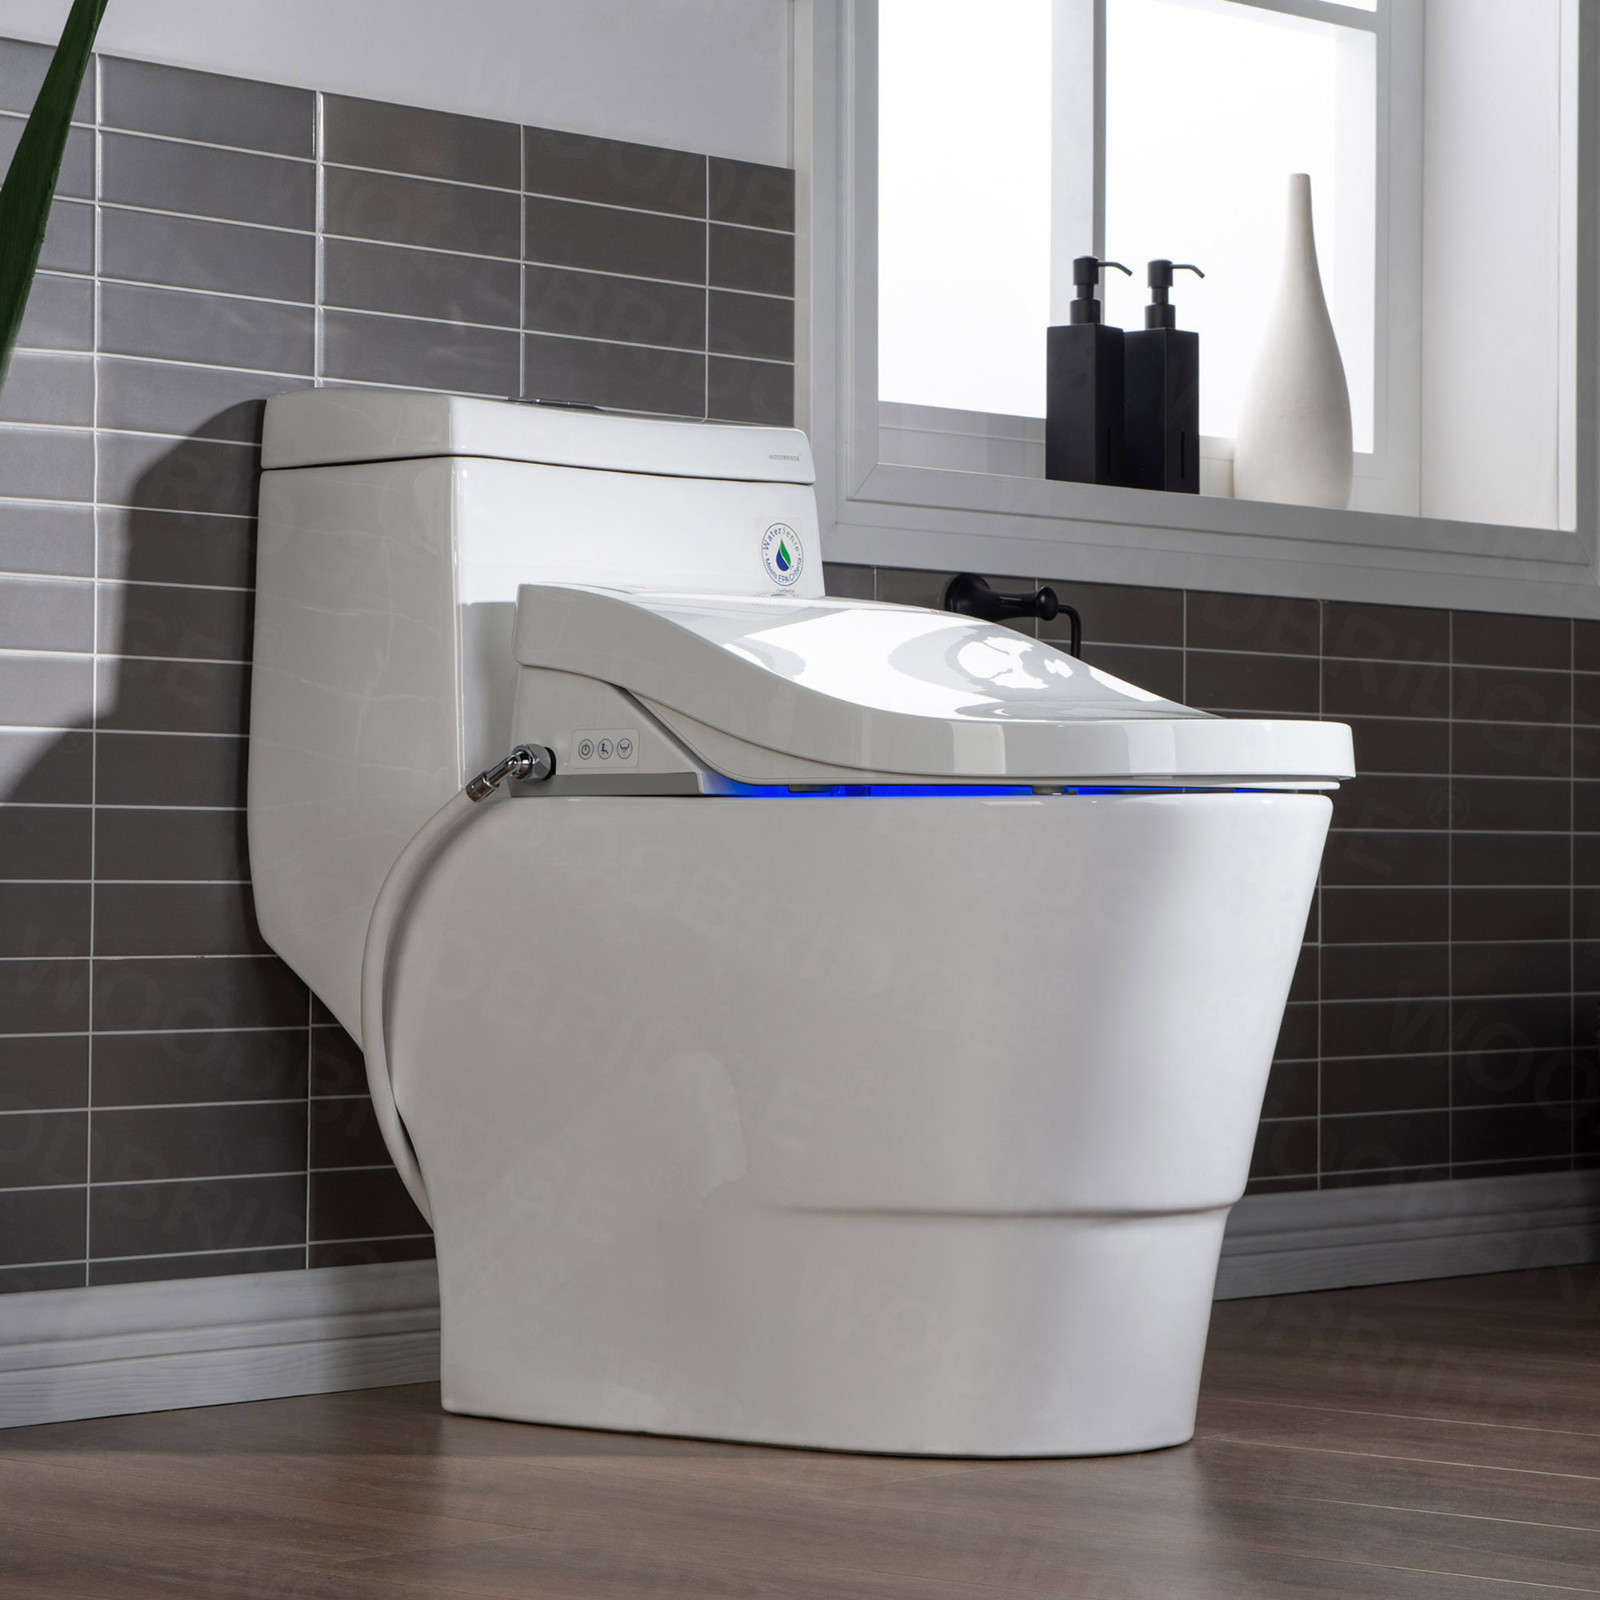  WOODBRIDGEE T-0008 Luxury Bidet Toilet, Elongated One Piece Toilet with Advanced Bidet Seat, Chair Height, Smart Toilet Seat with Temperature Controlled Wash Functions and Air Dryer_10910